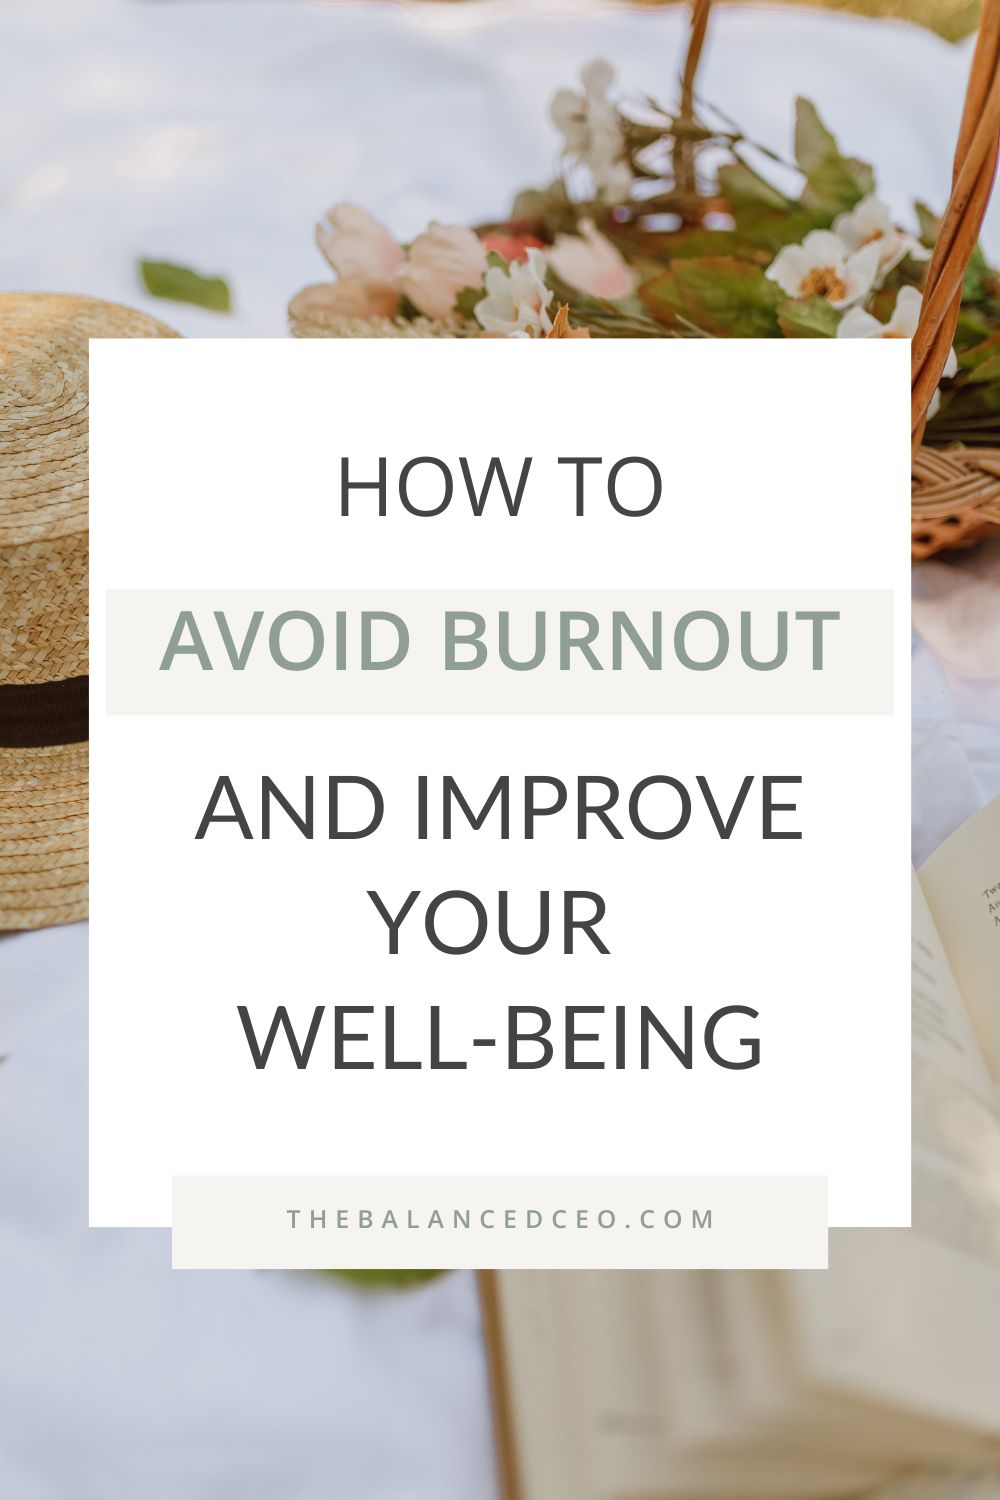 How to Avoid Burnout and Improve Your Well-Being